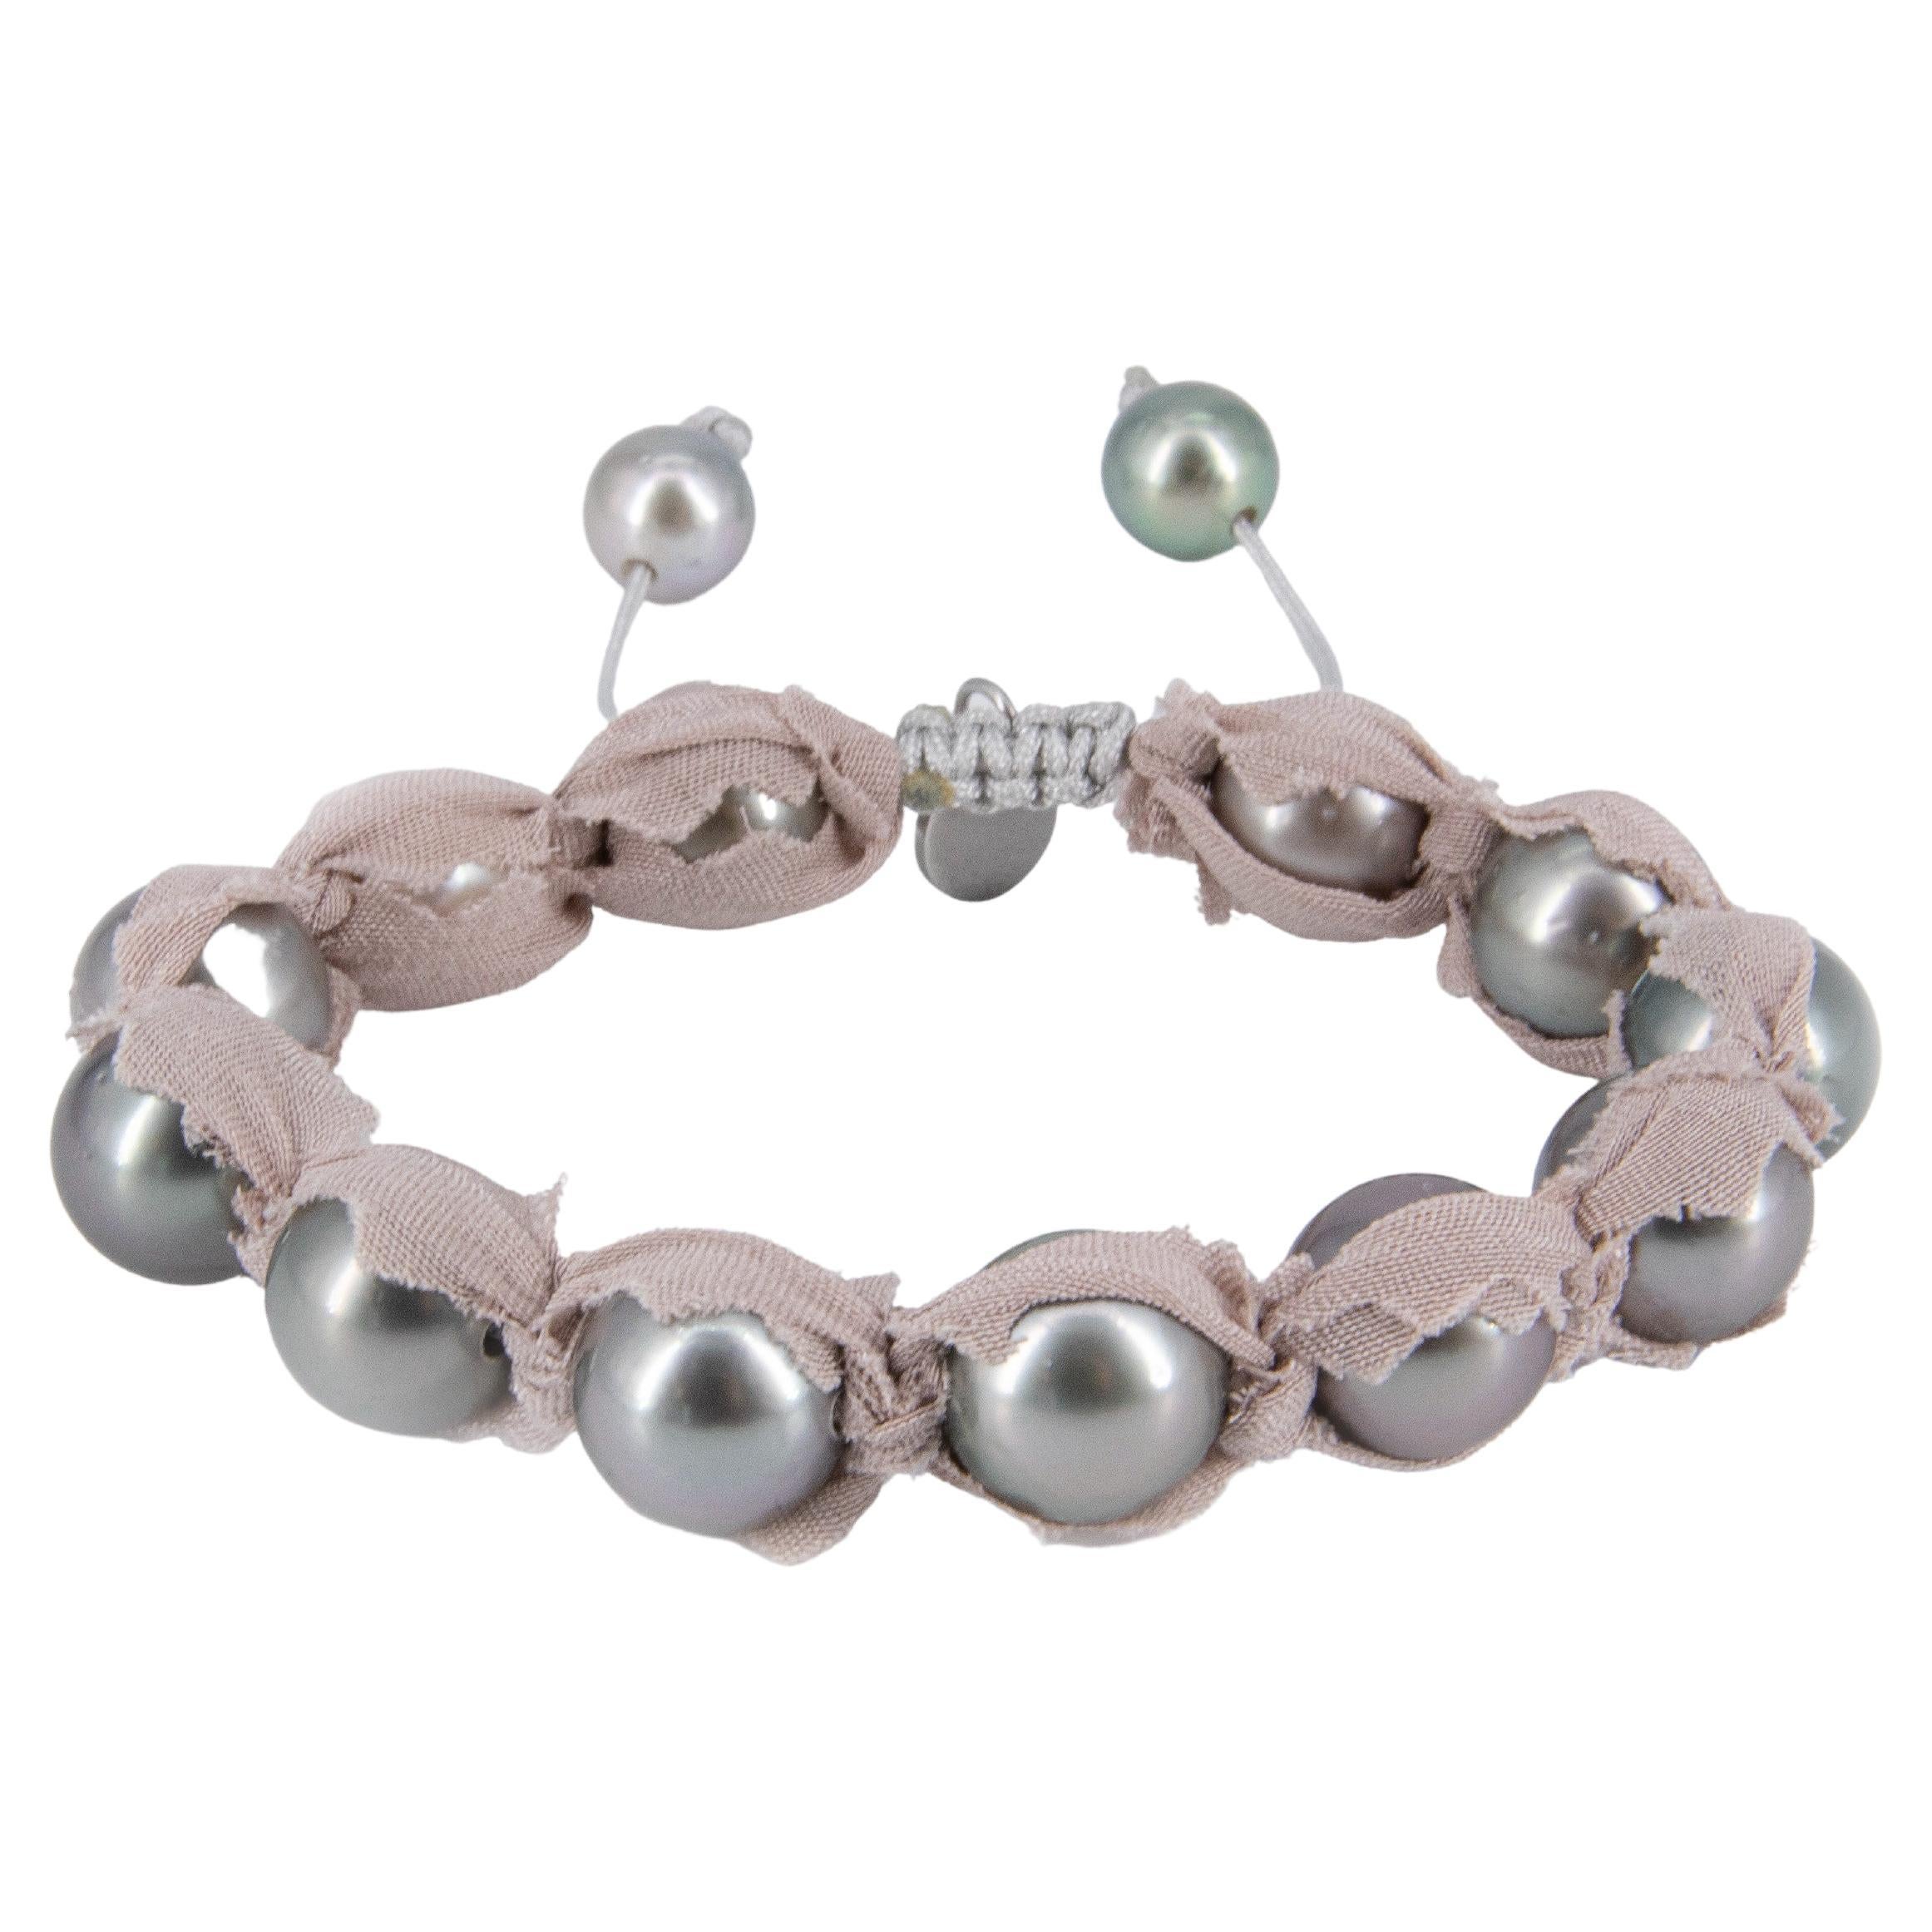 This bracelet is made of gray Tahitian pearls with 2 diamond pavé cones in blackened sterling silver plus 3 large rosé/purple iridescent baroque freshwater pearls. It is beaded on black cotton coated high quality elastic band, which lets the